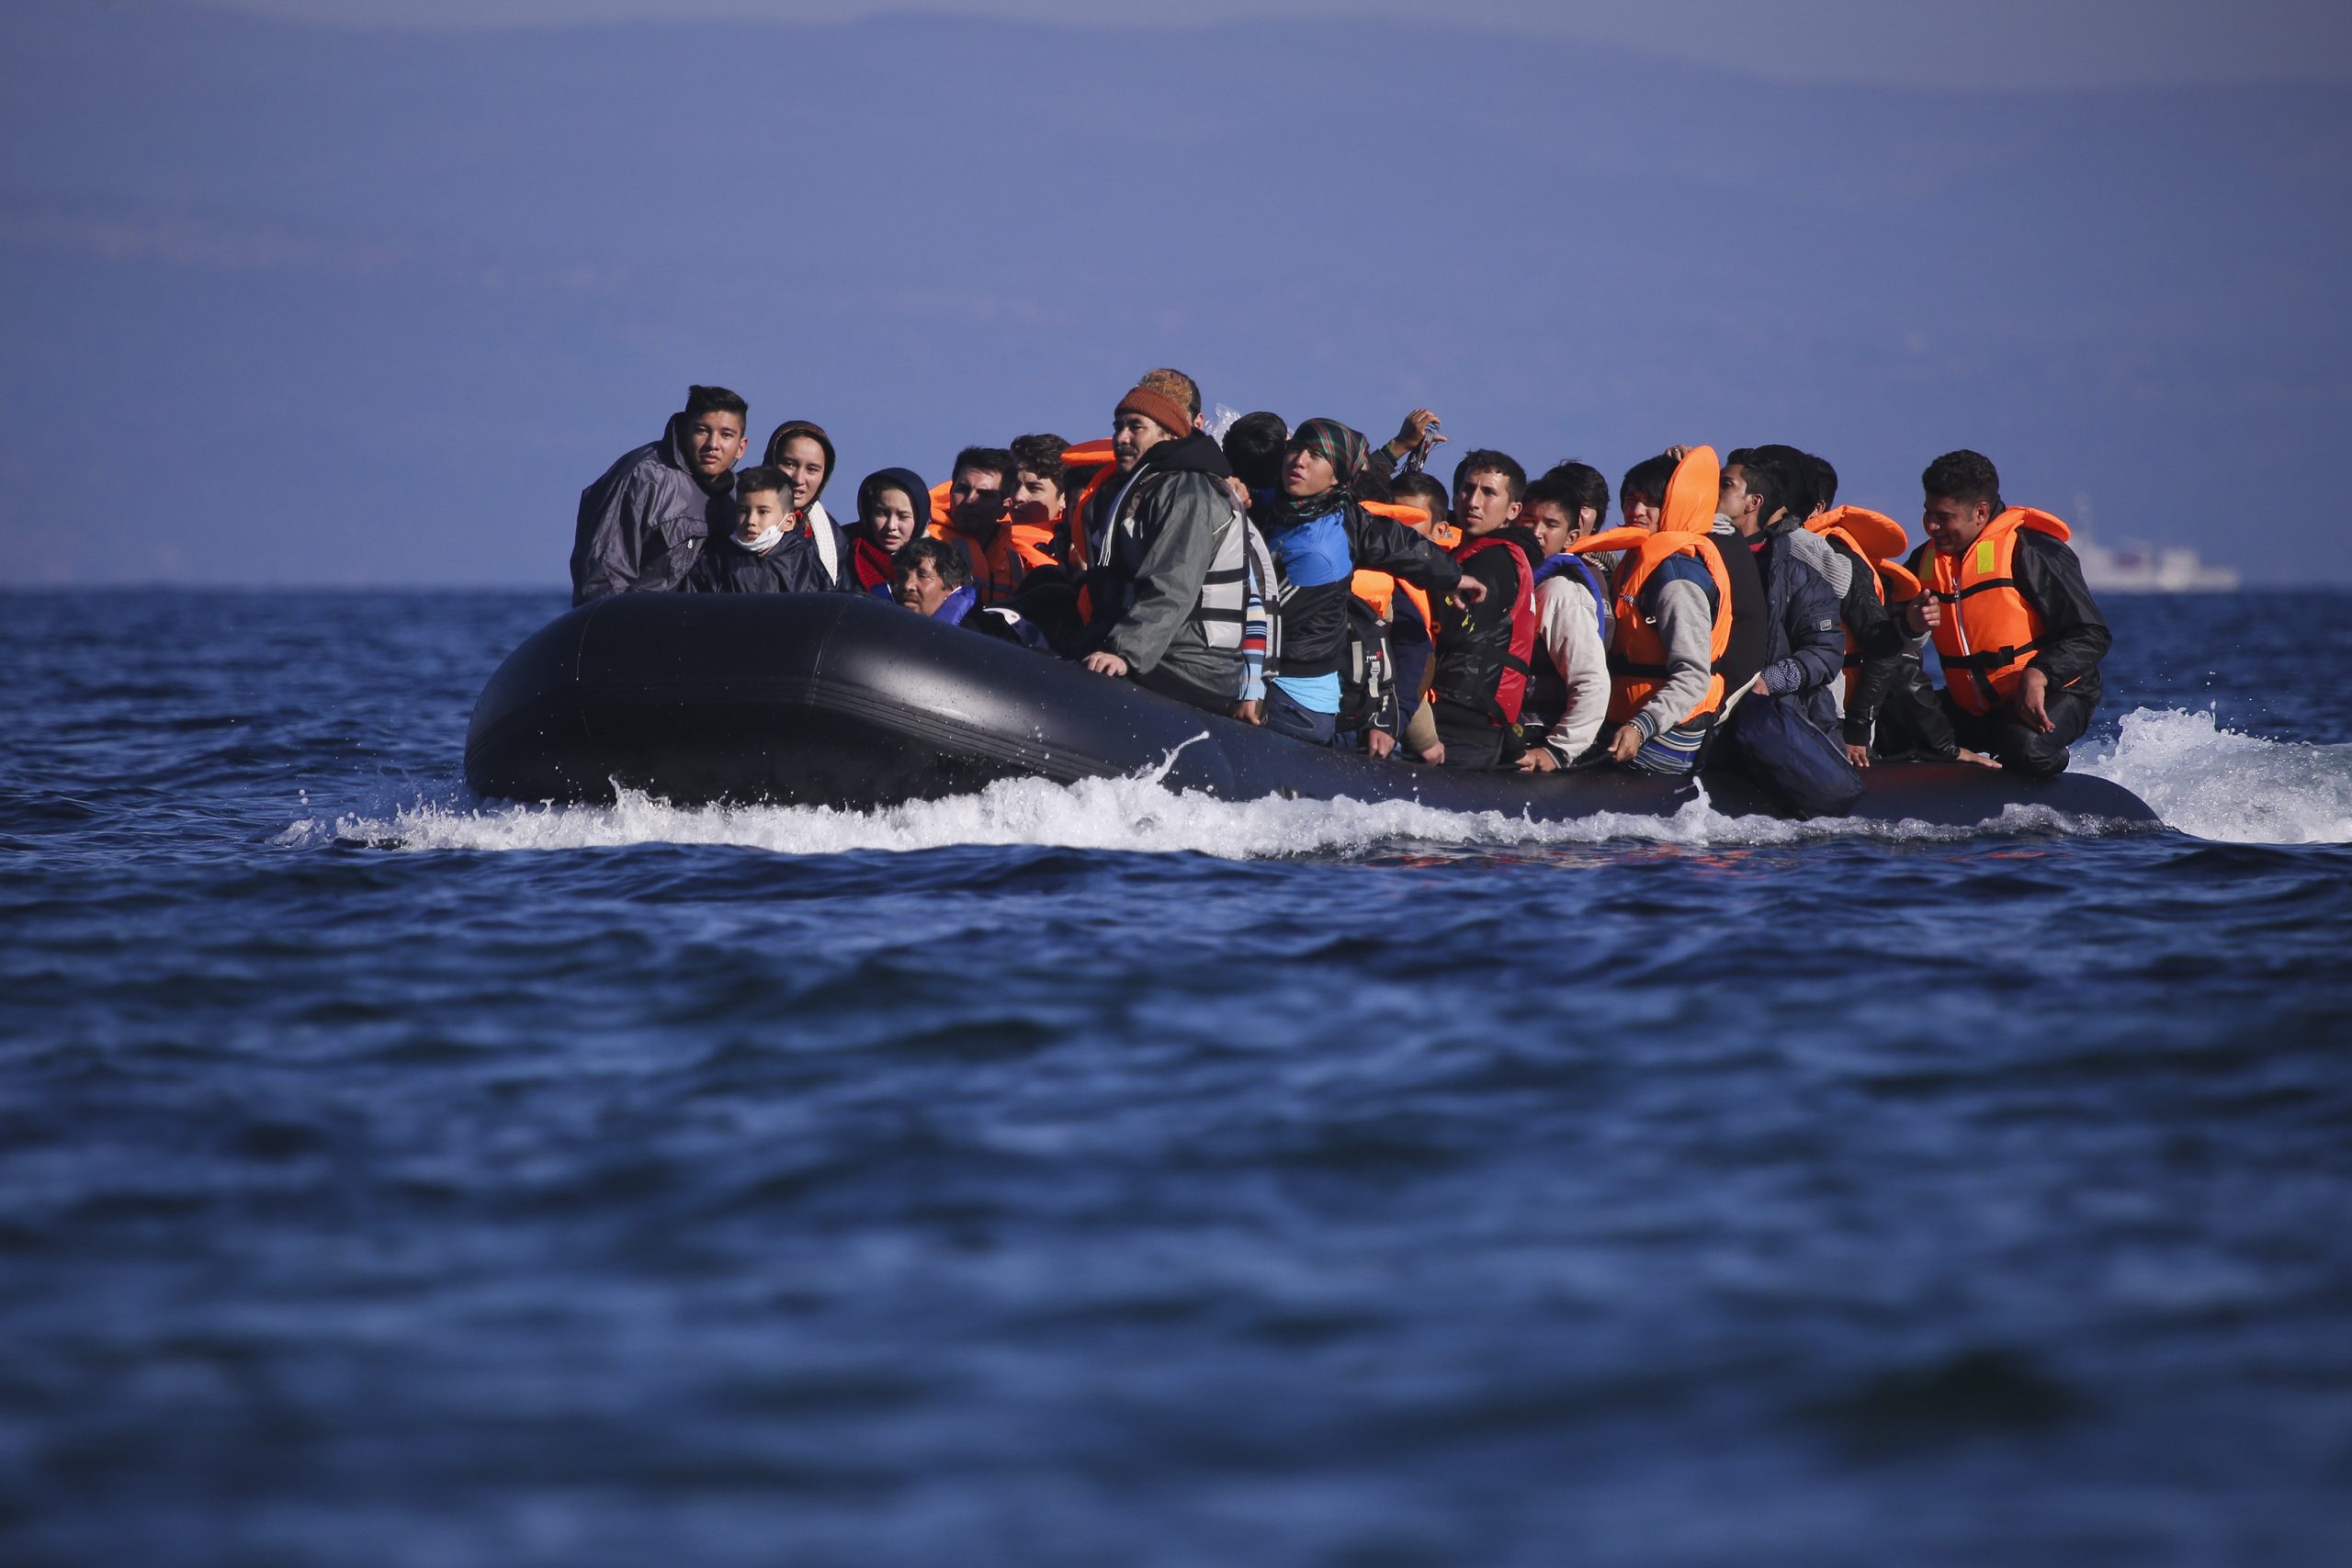 Turkey Accuses Greece Of Throwing Handcuffed Migrants Into The Sea